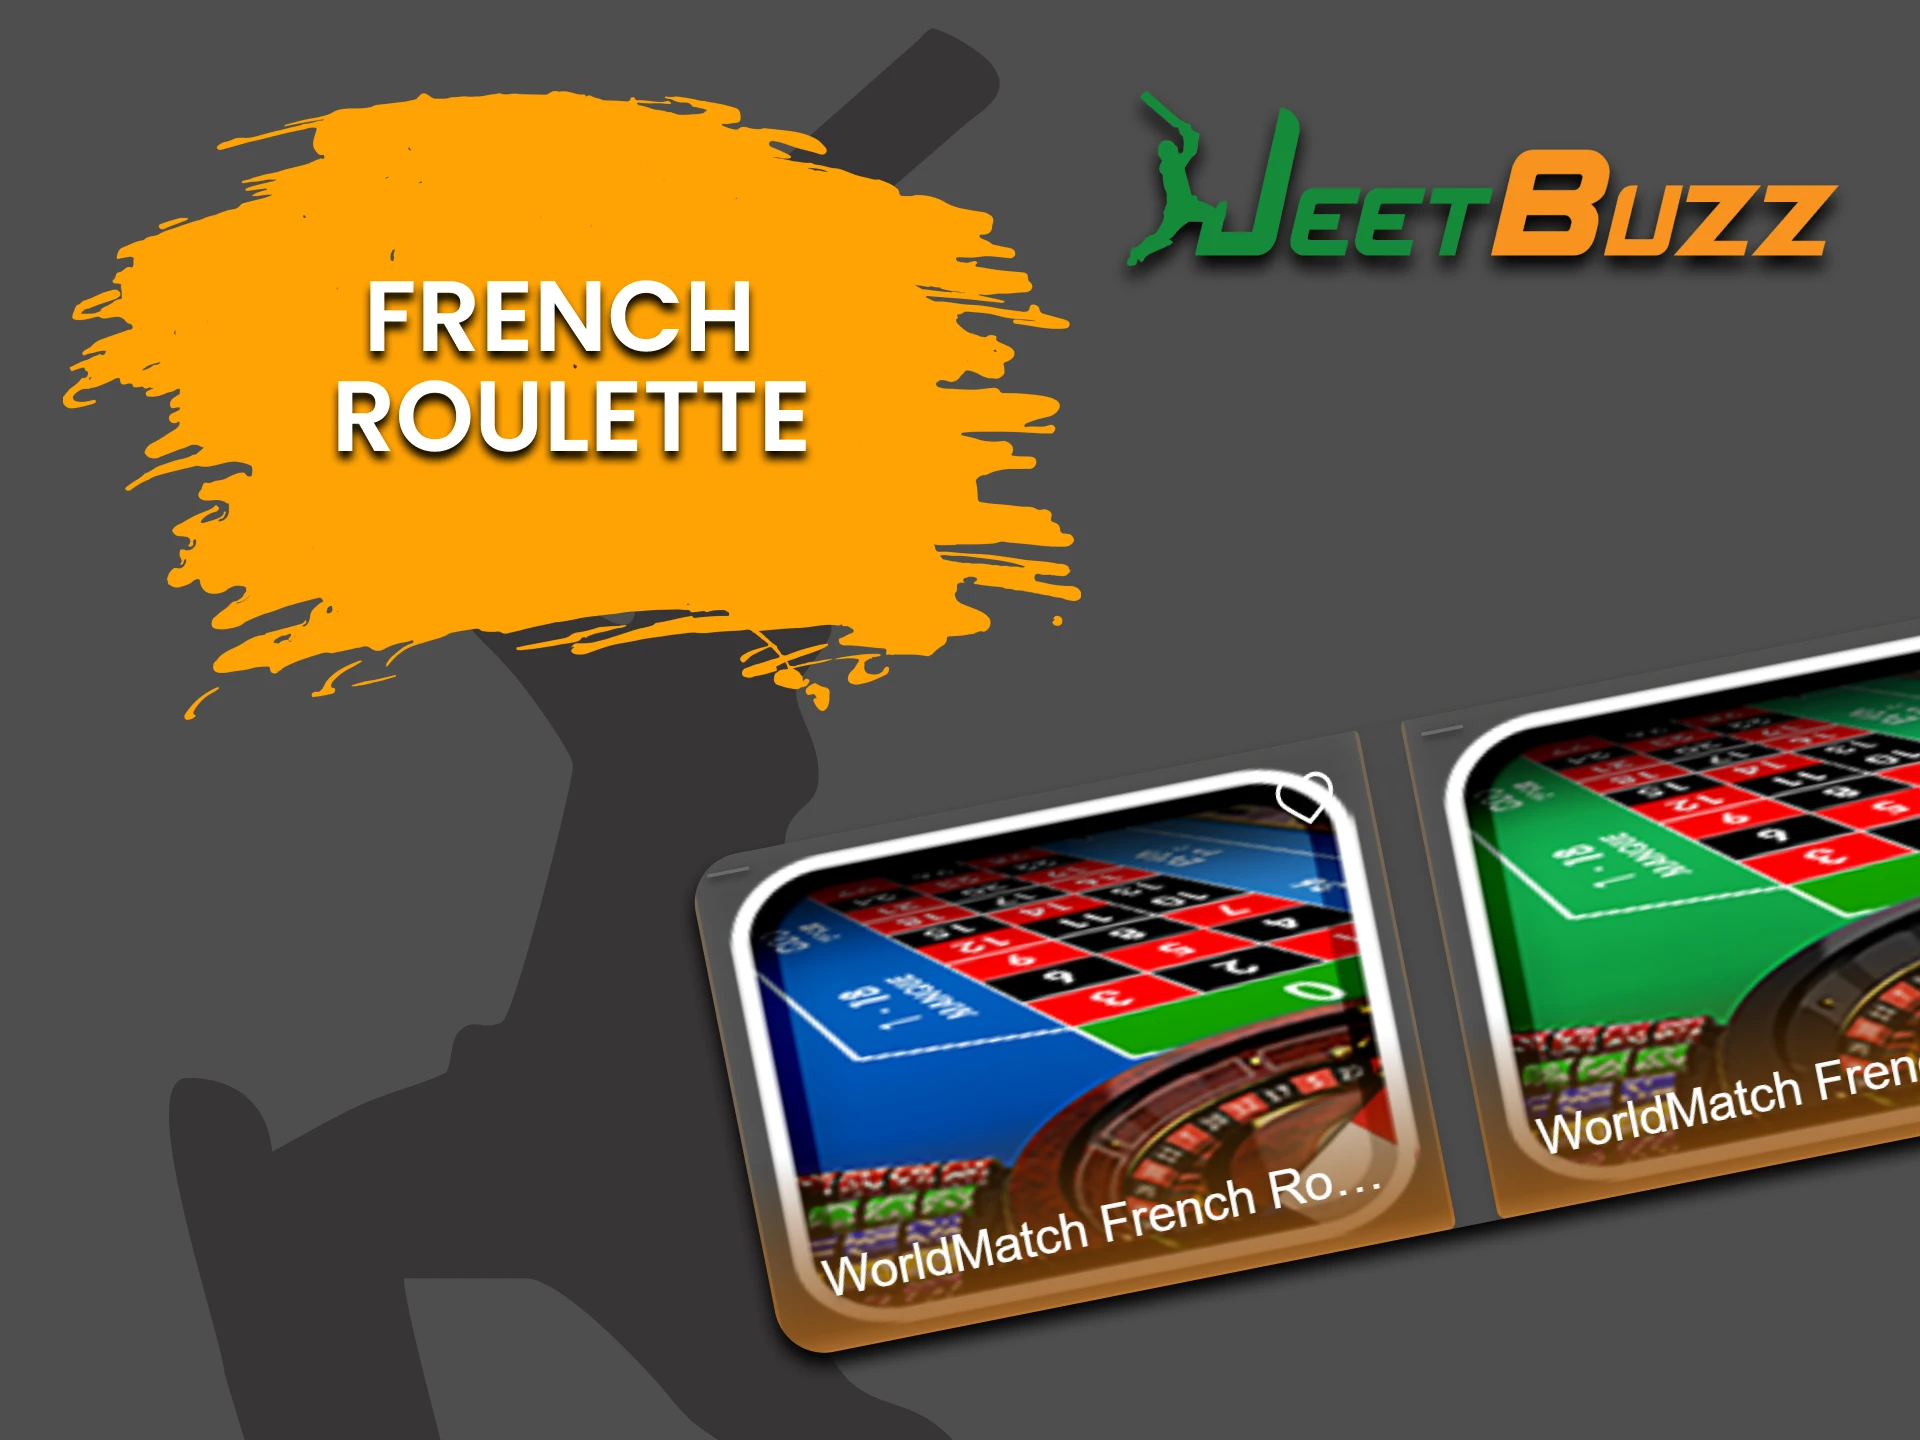 To play Roulette on JeetBuzz, choose French Roulette.